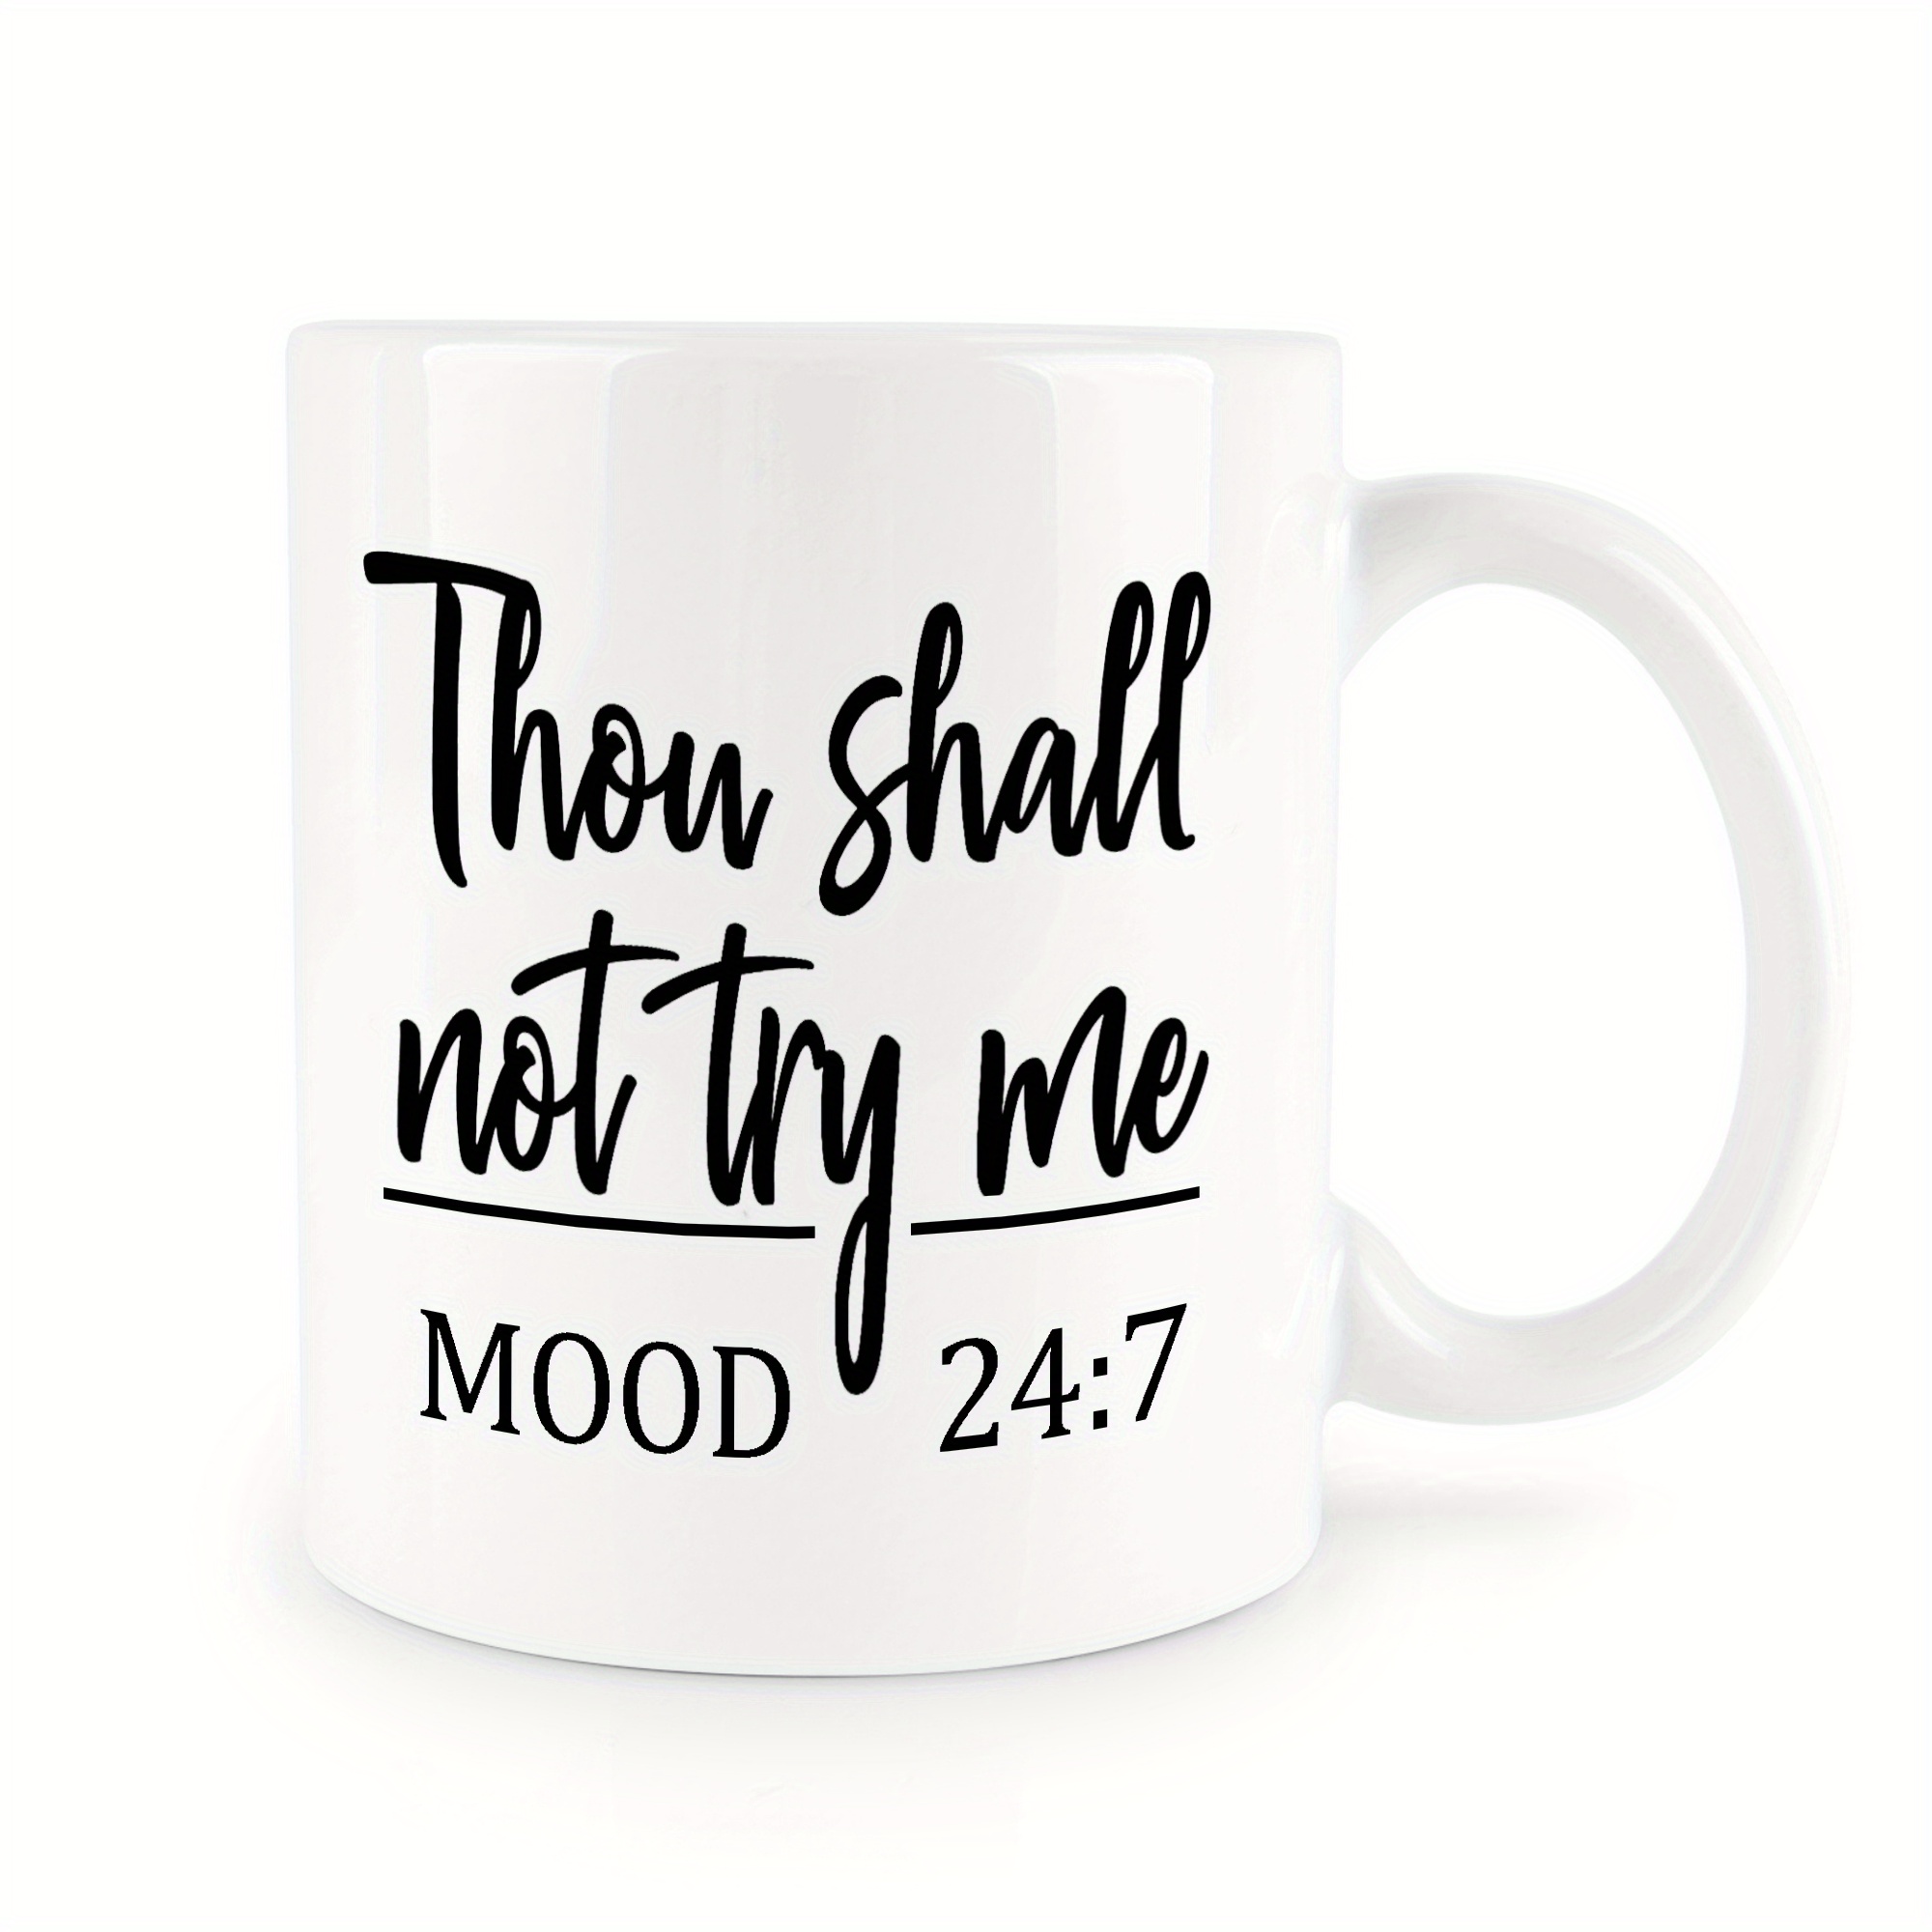 This lady is an awesome mom-coffee mug-tea cup-gift-novelty-funny-moth –  Habensen Enterprises